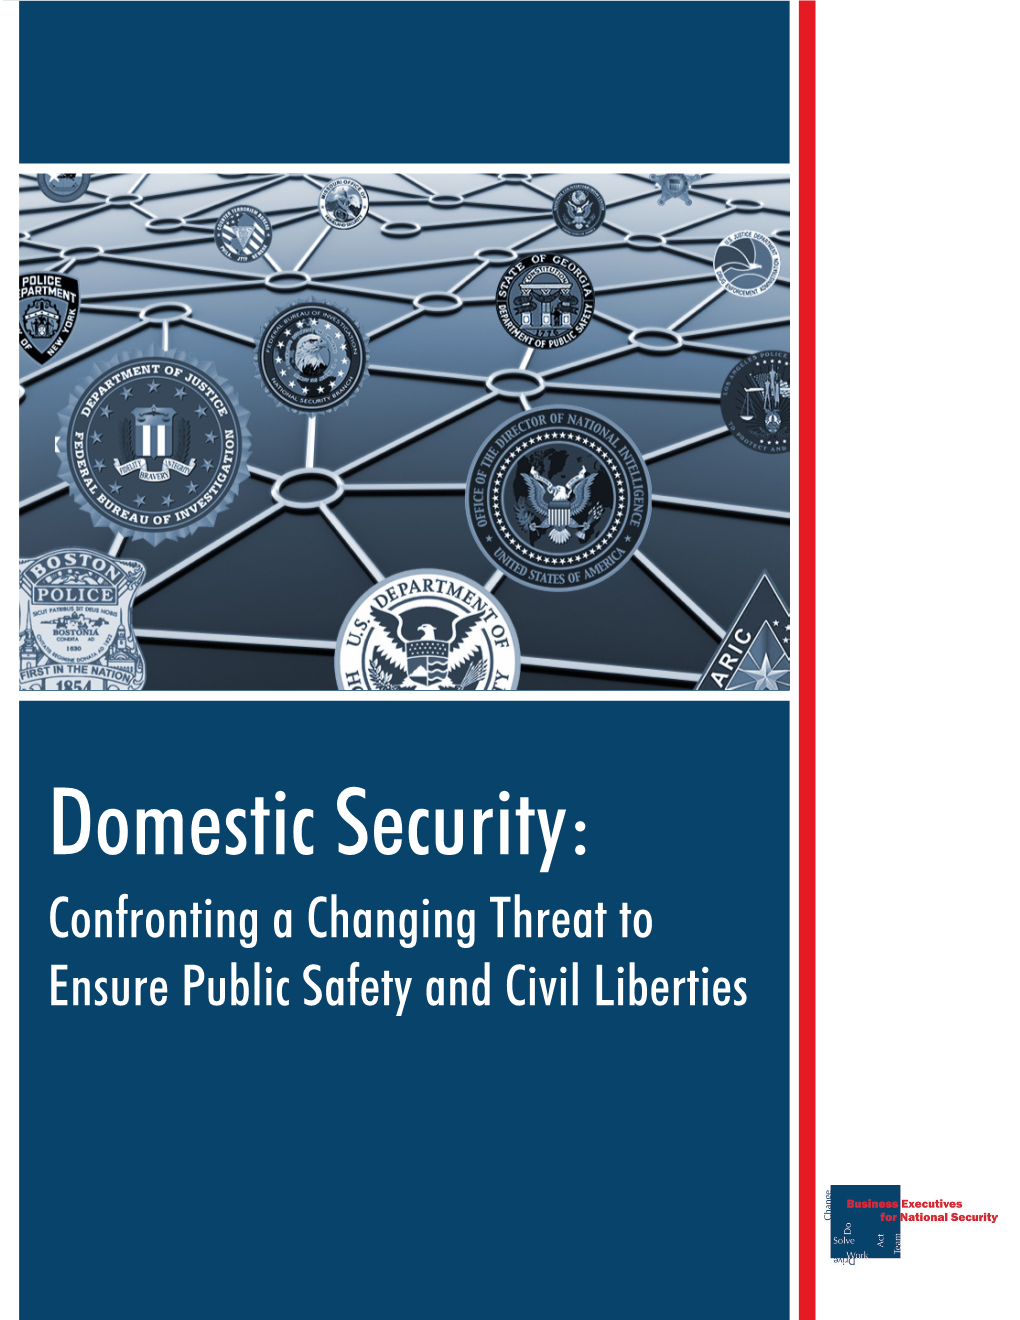 Domestic Security: Confronting a Changing Threat to Ensure Public Safety and Civil Liberties 1